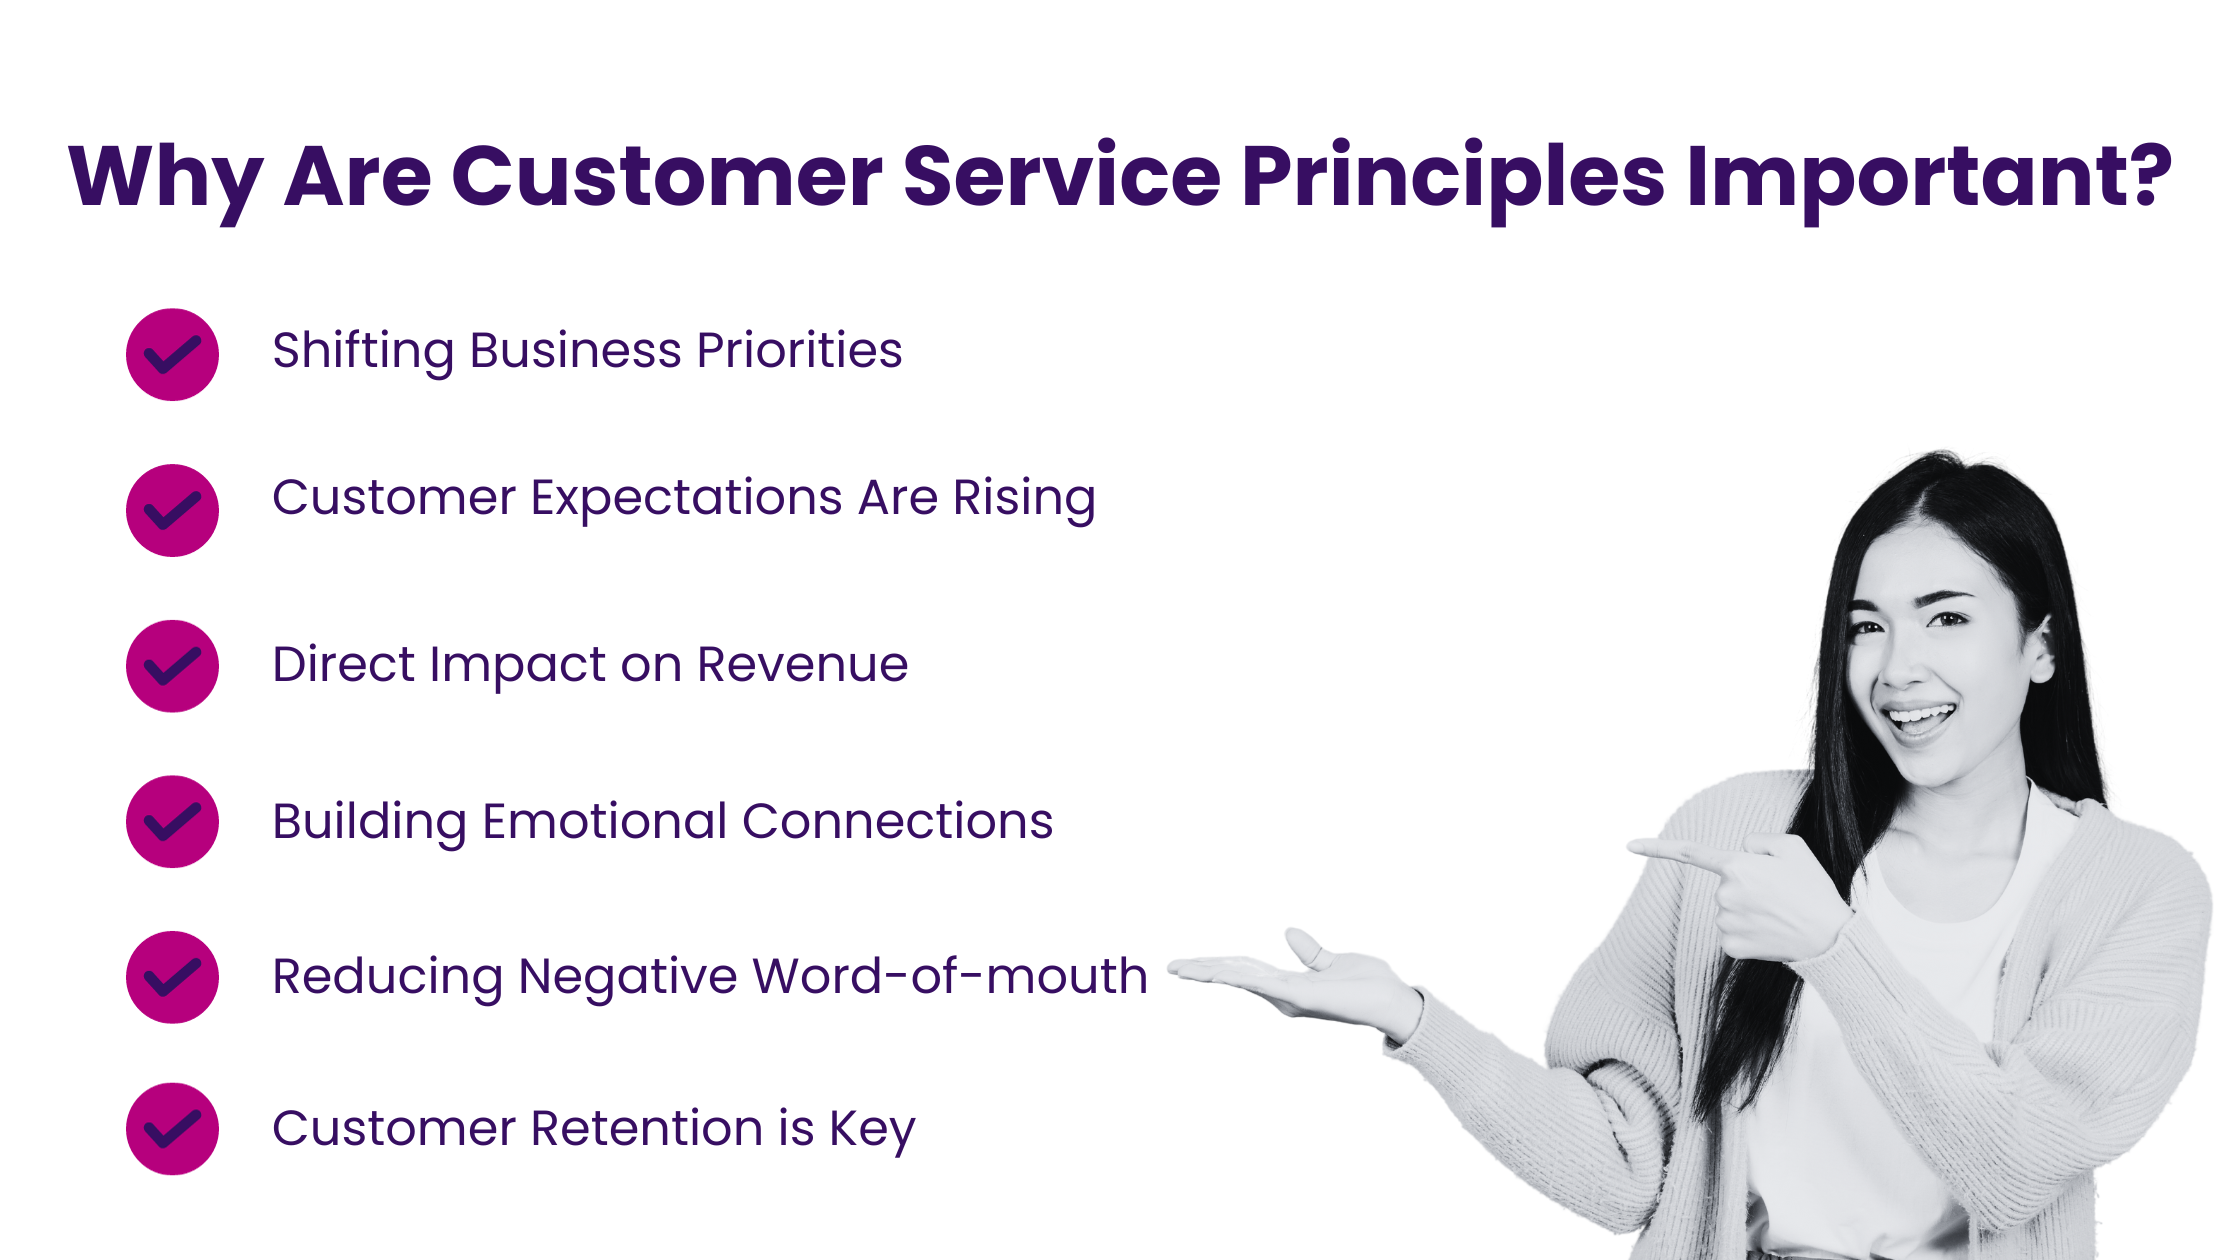 Why Are Customer Service Principles Important